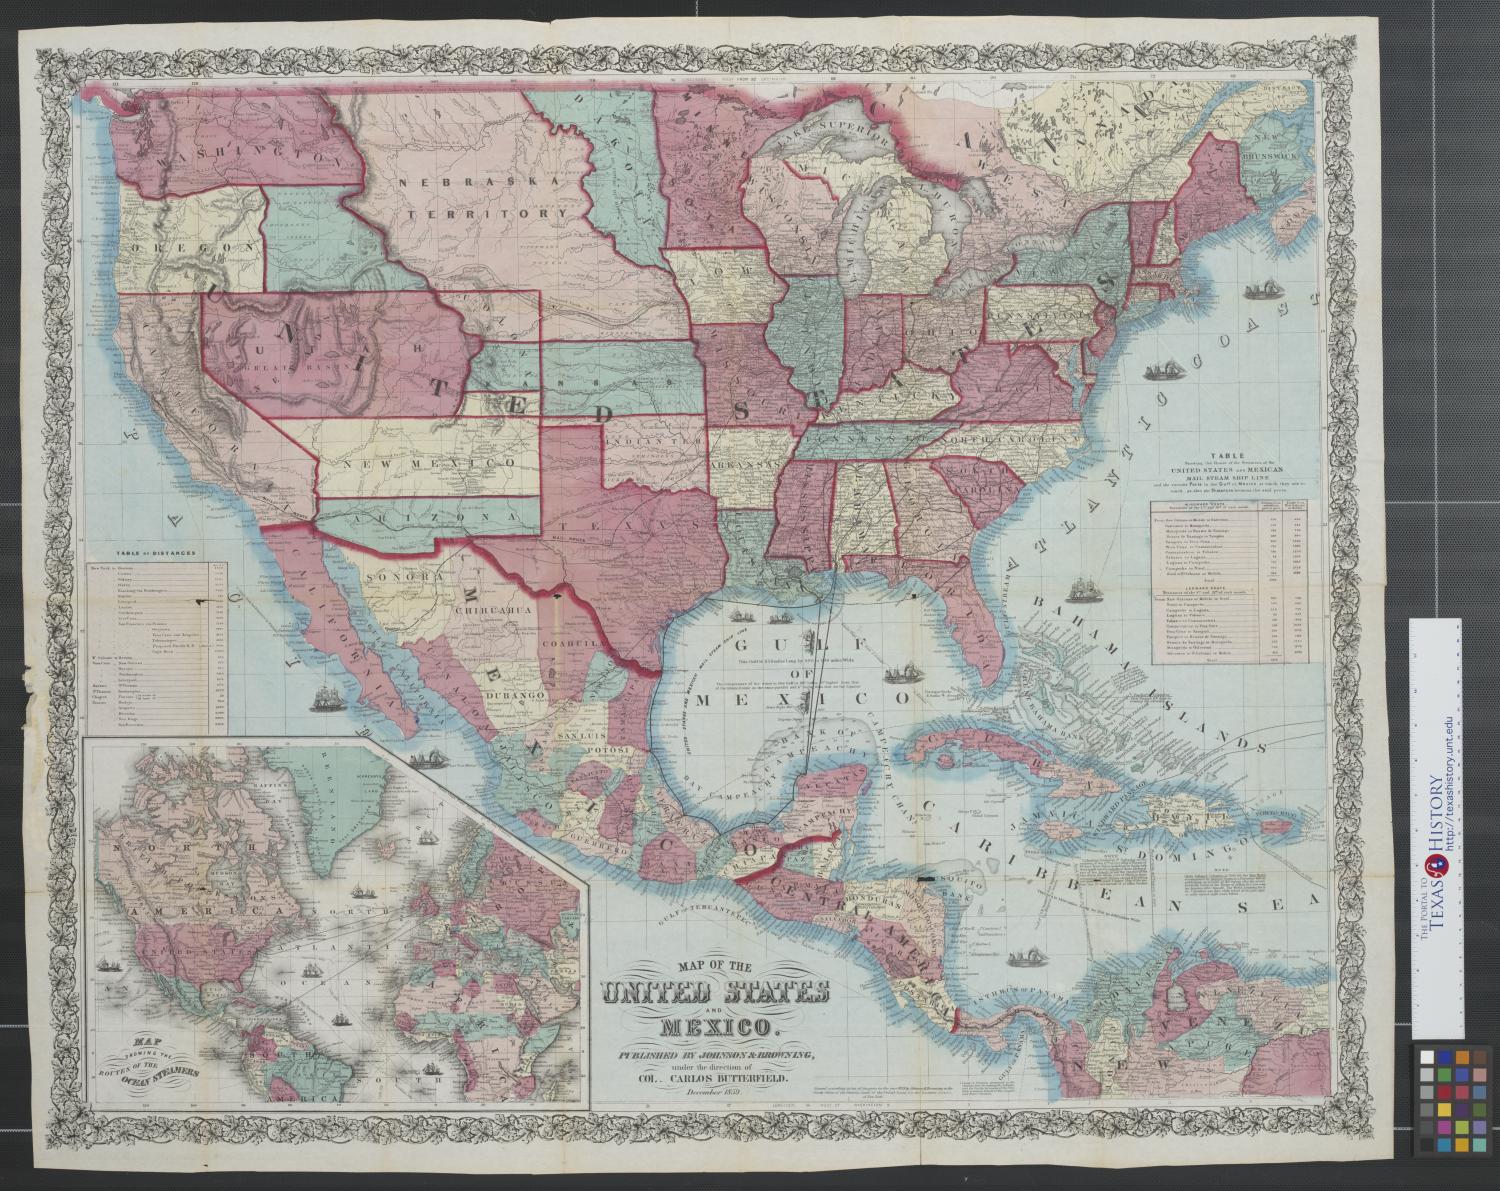 Map of the United States and Mexico. - The Portal to Texas History